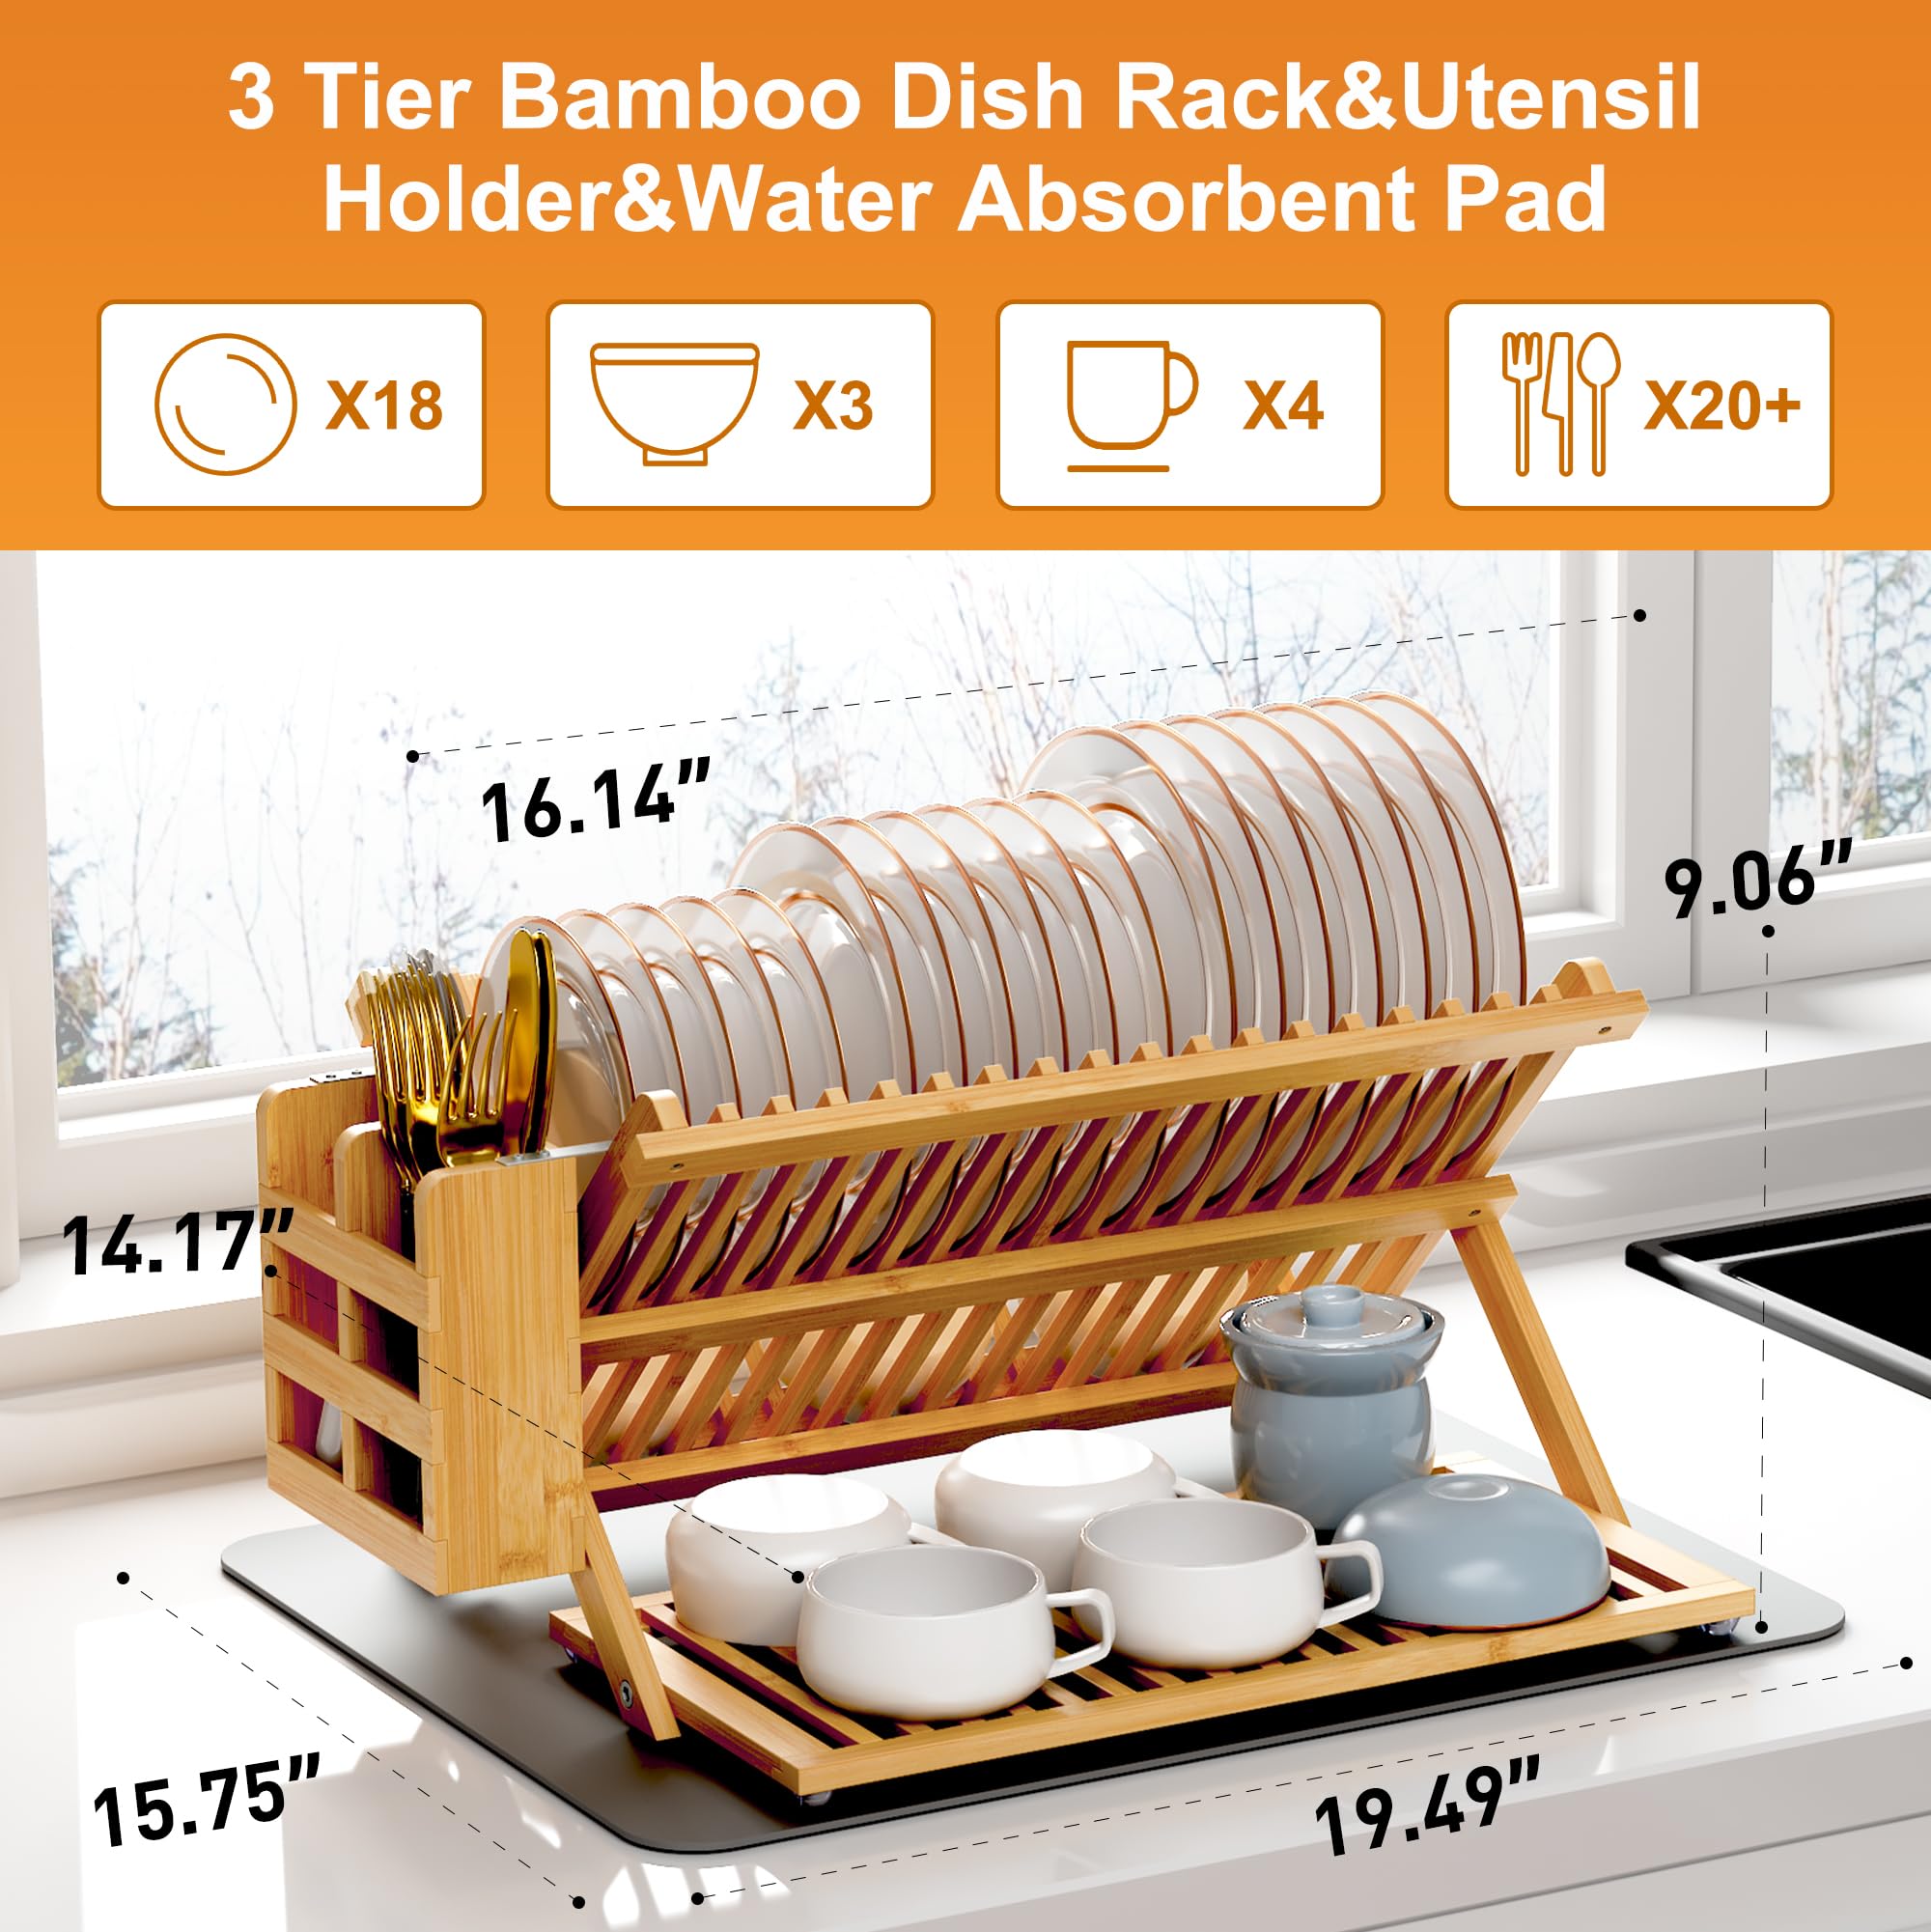 Greenual Bamboo Dish Drying Rack with Utensil Holder, 3 Tier Collapsible Dish Rack, Wooden Dish Racks for Kitchen Counter, Large Folding Drying Holder with Absorbent Dish Drying Mat